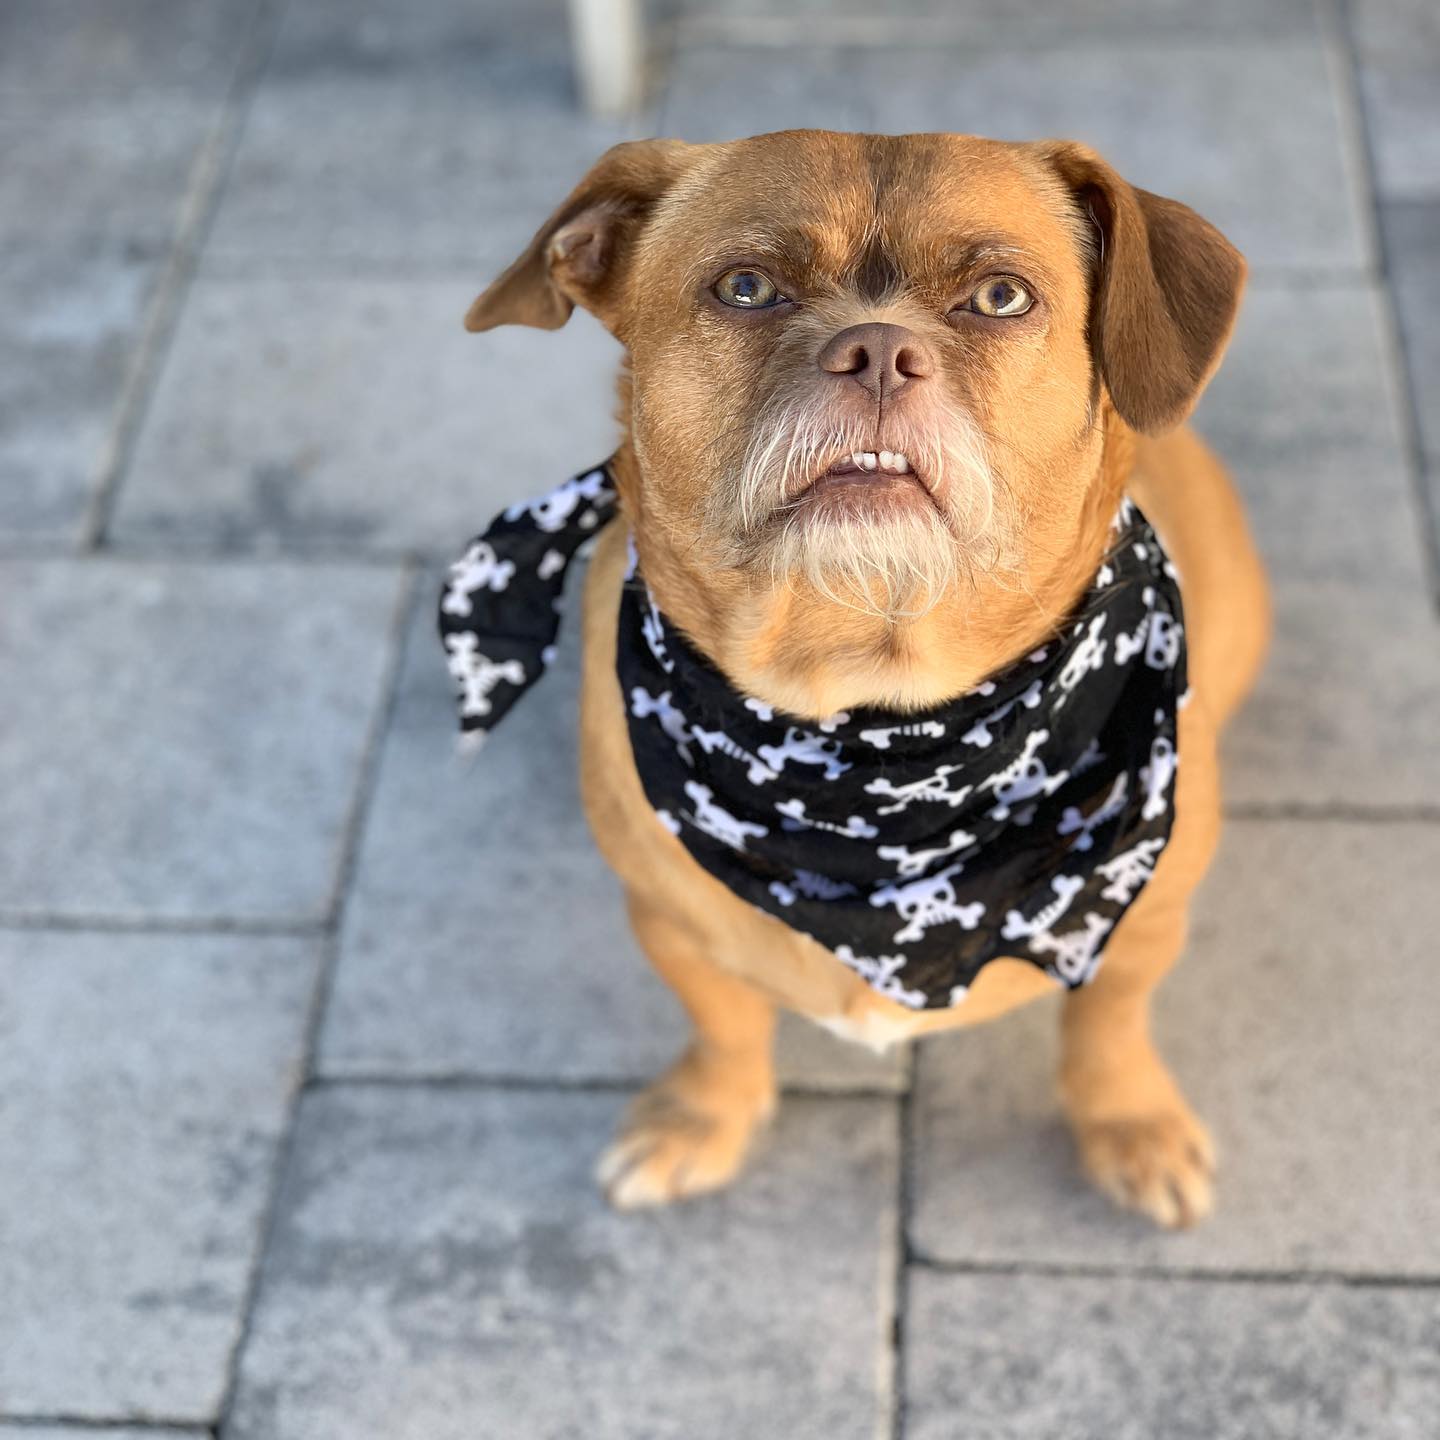 Bacon the dog wearing bandana around his neck and staring into camera.